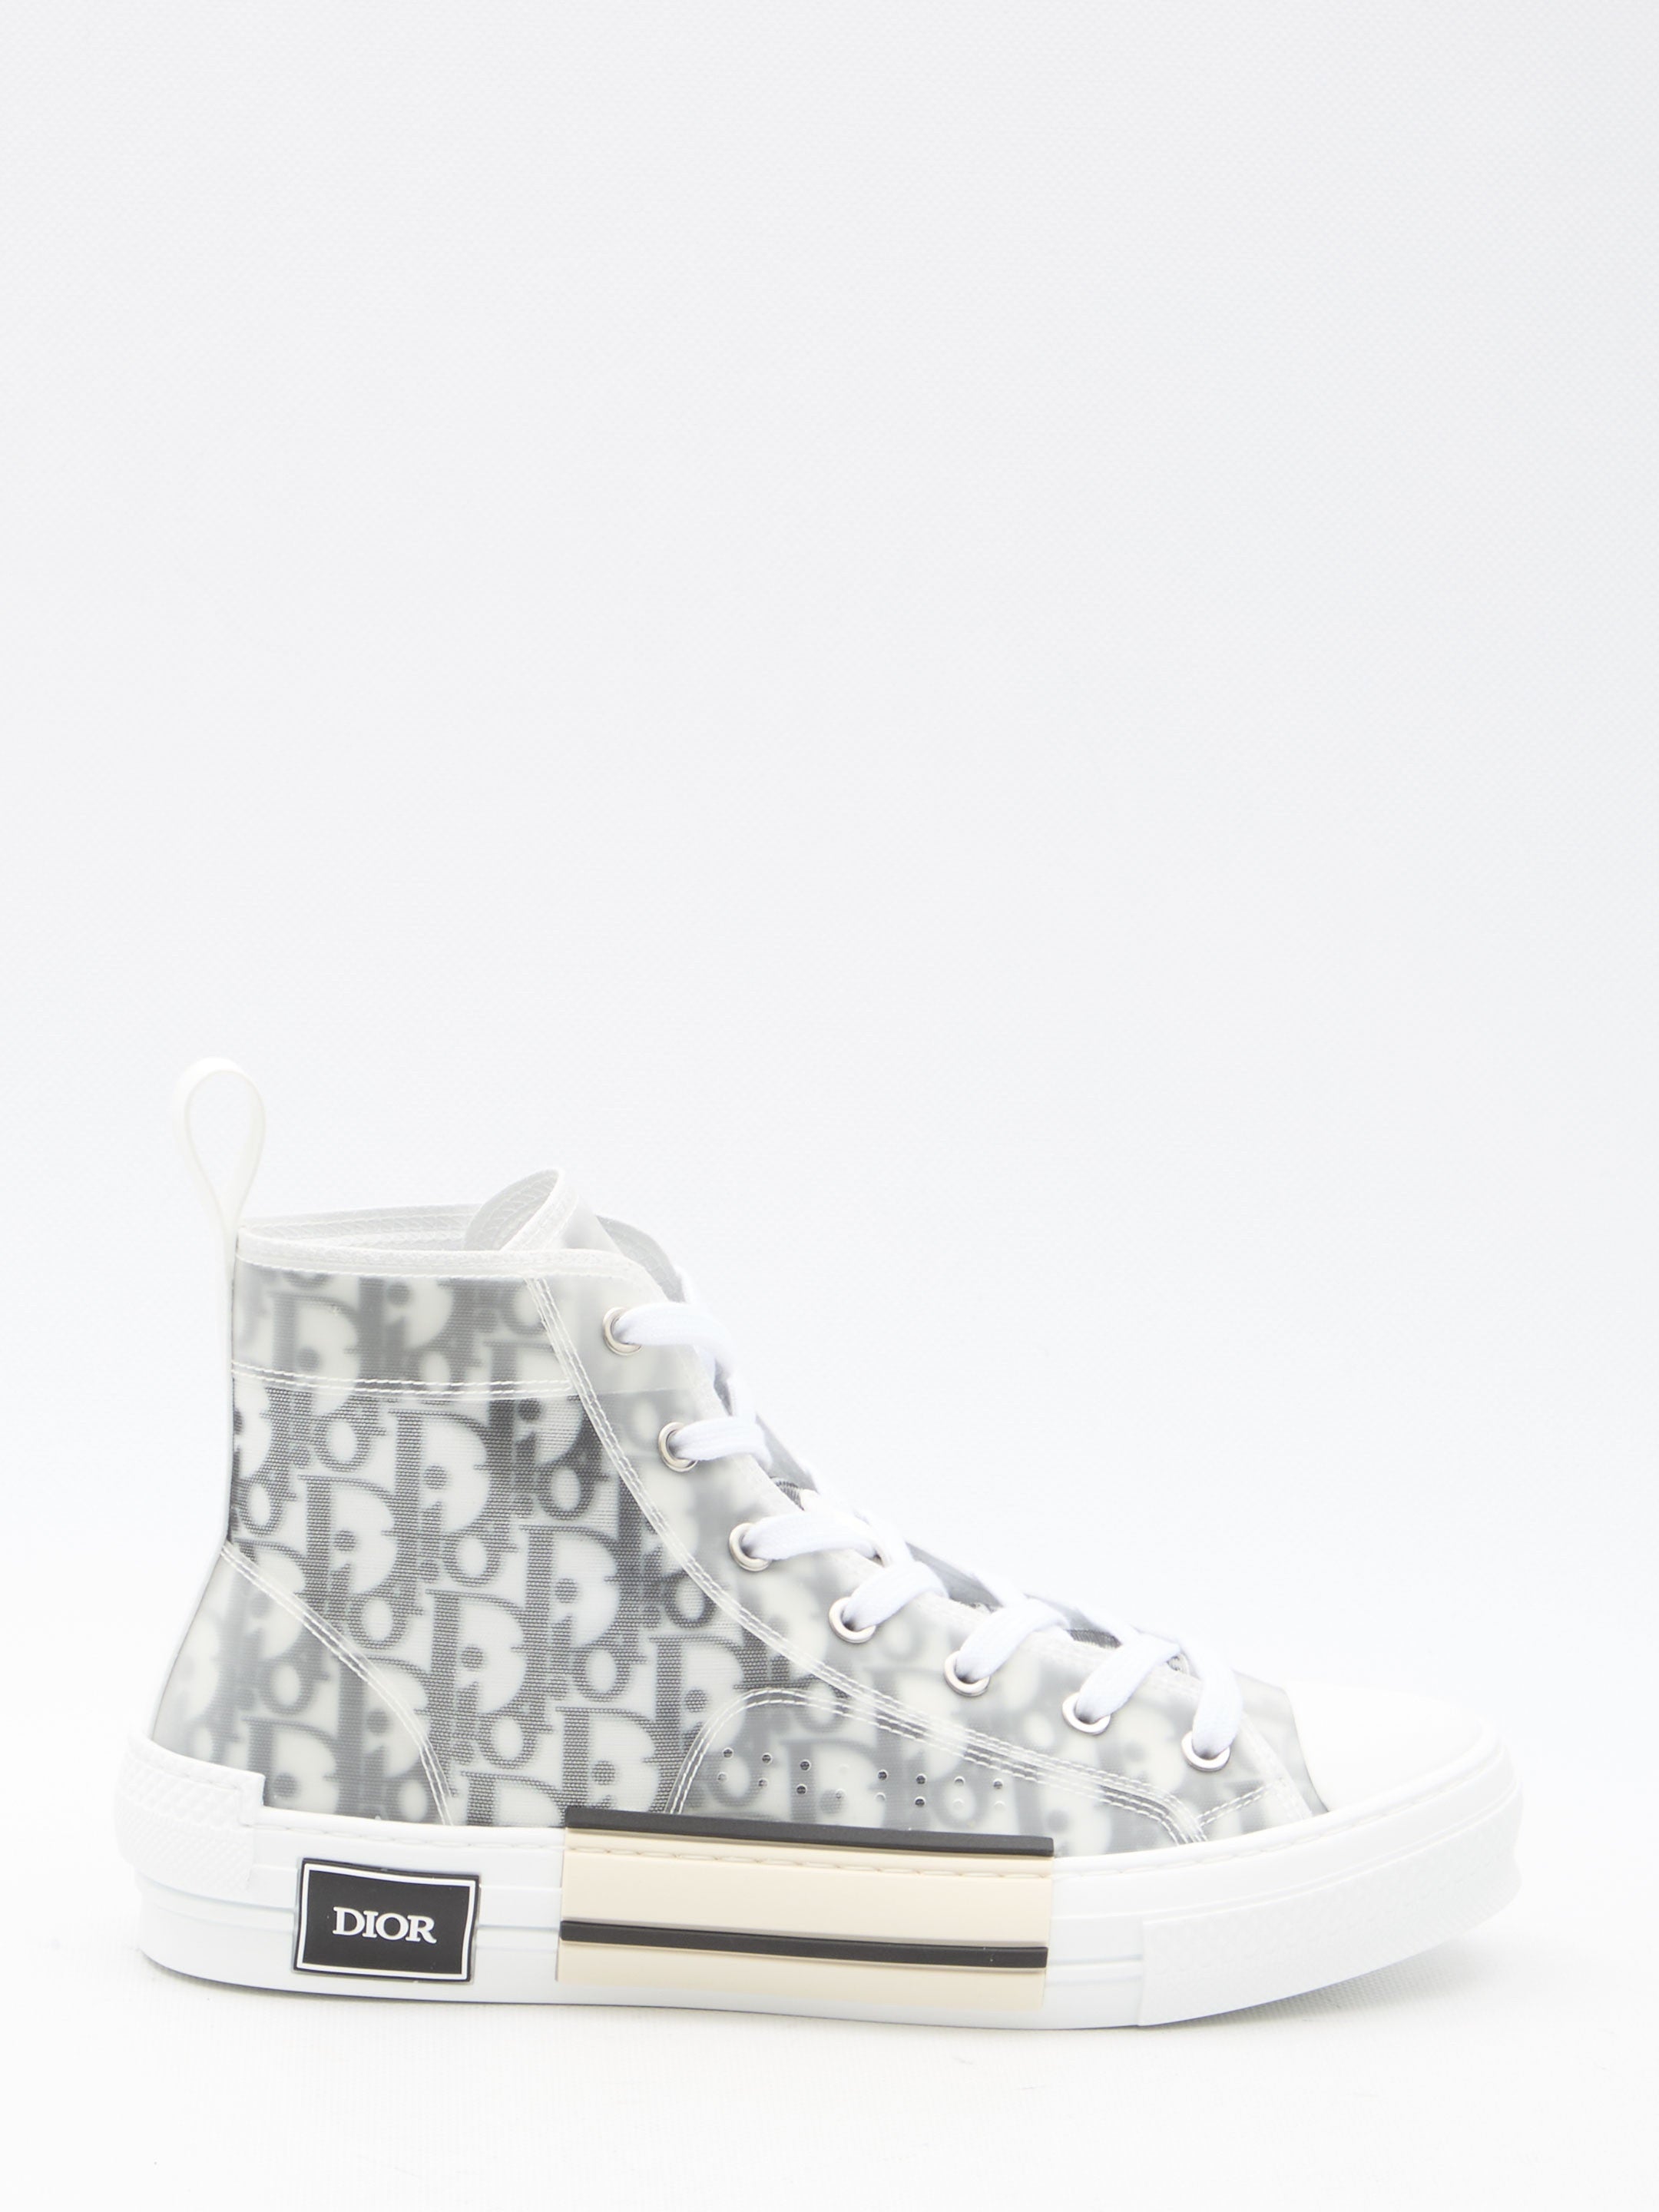 DIOR-HOMME-OUTLET-SALE-B23-high-top-sneakers-Sneakers-43-WHITE-ARCHIVE-COLLECTION.jpg